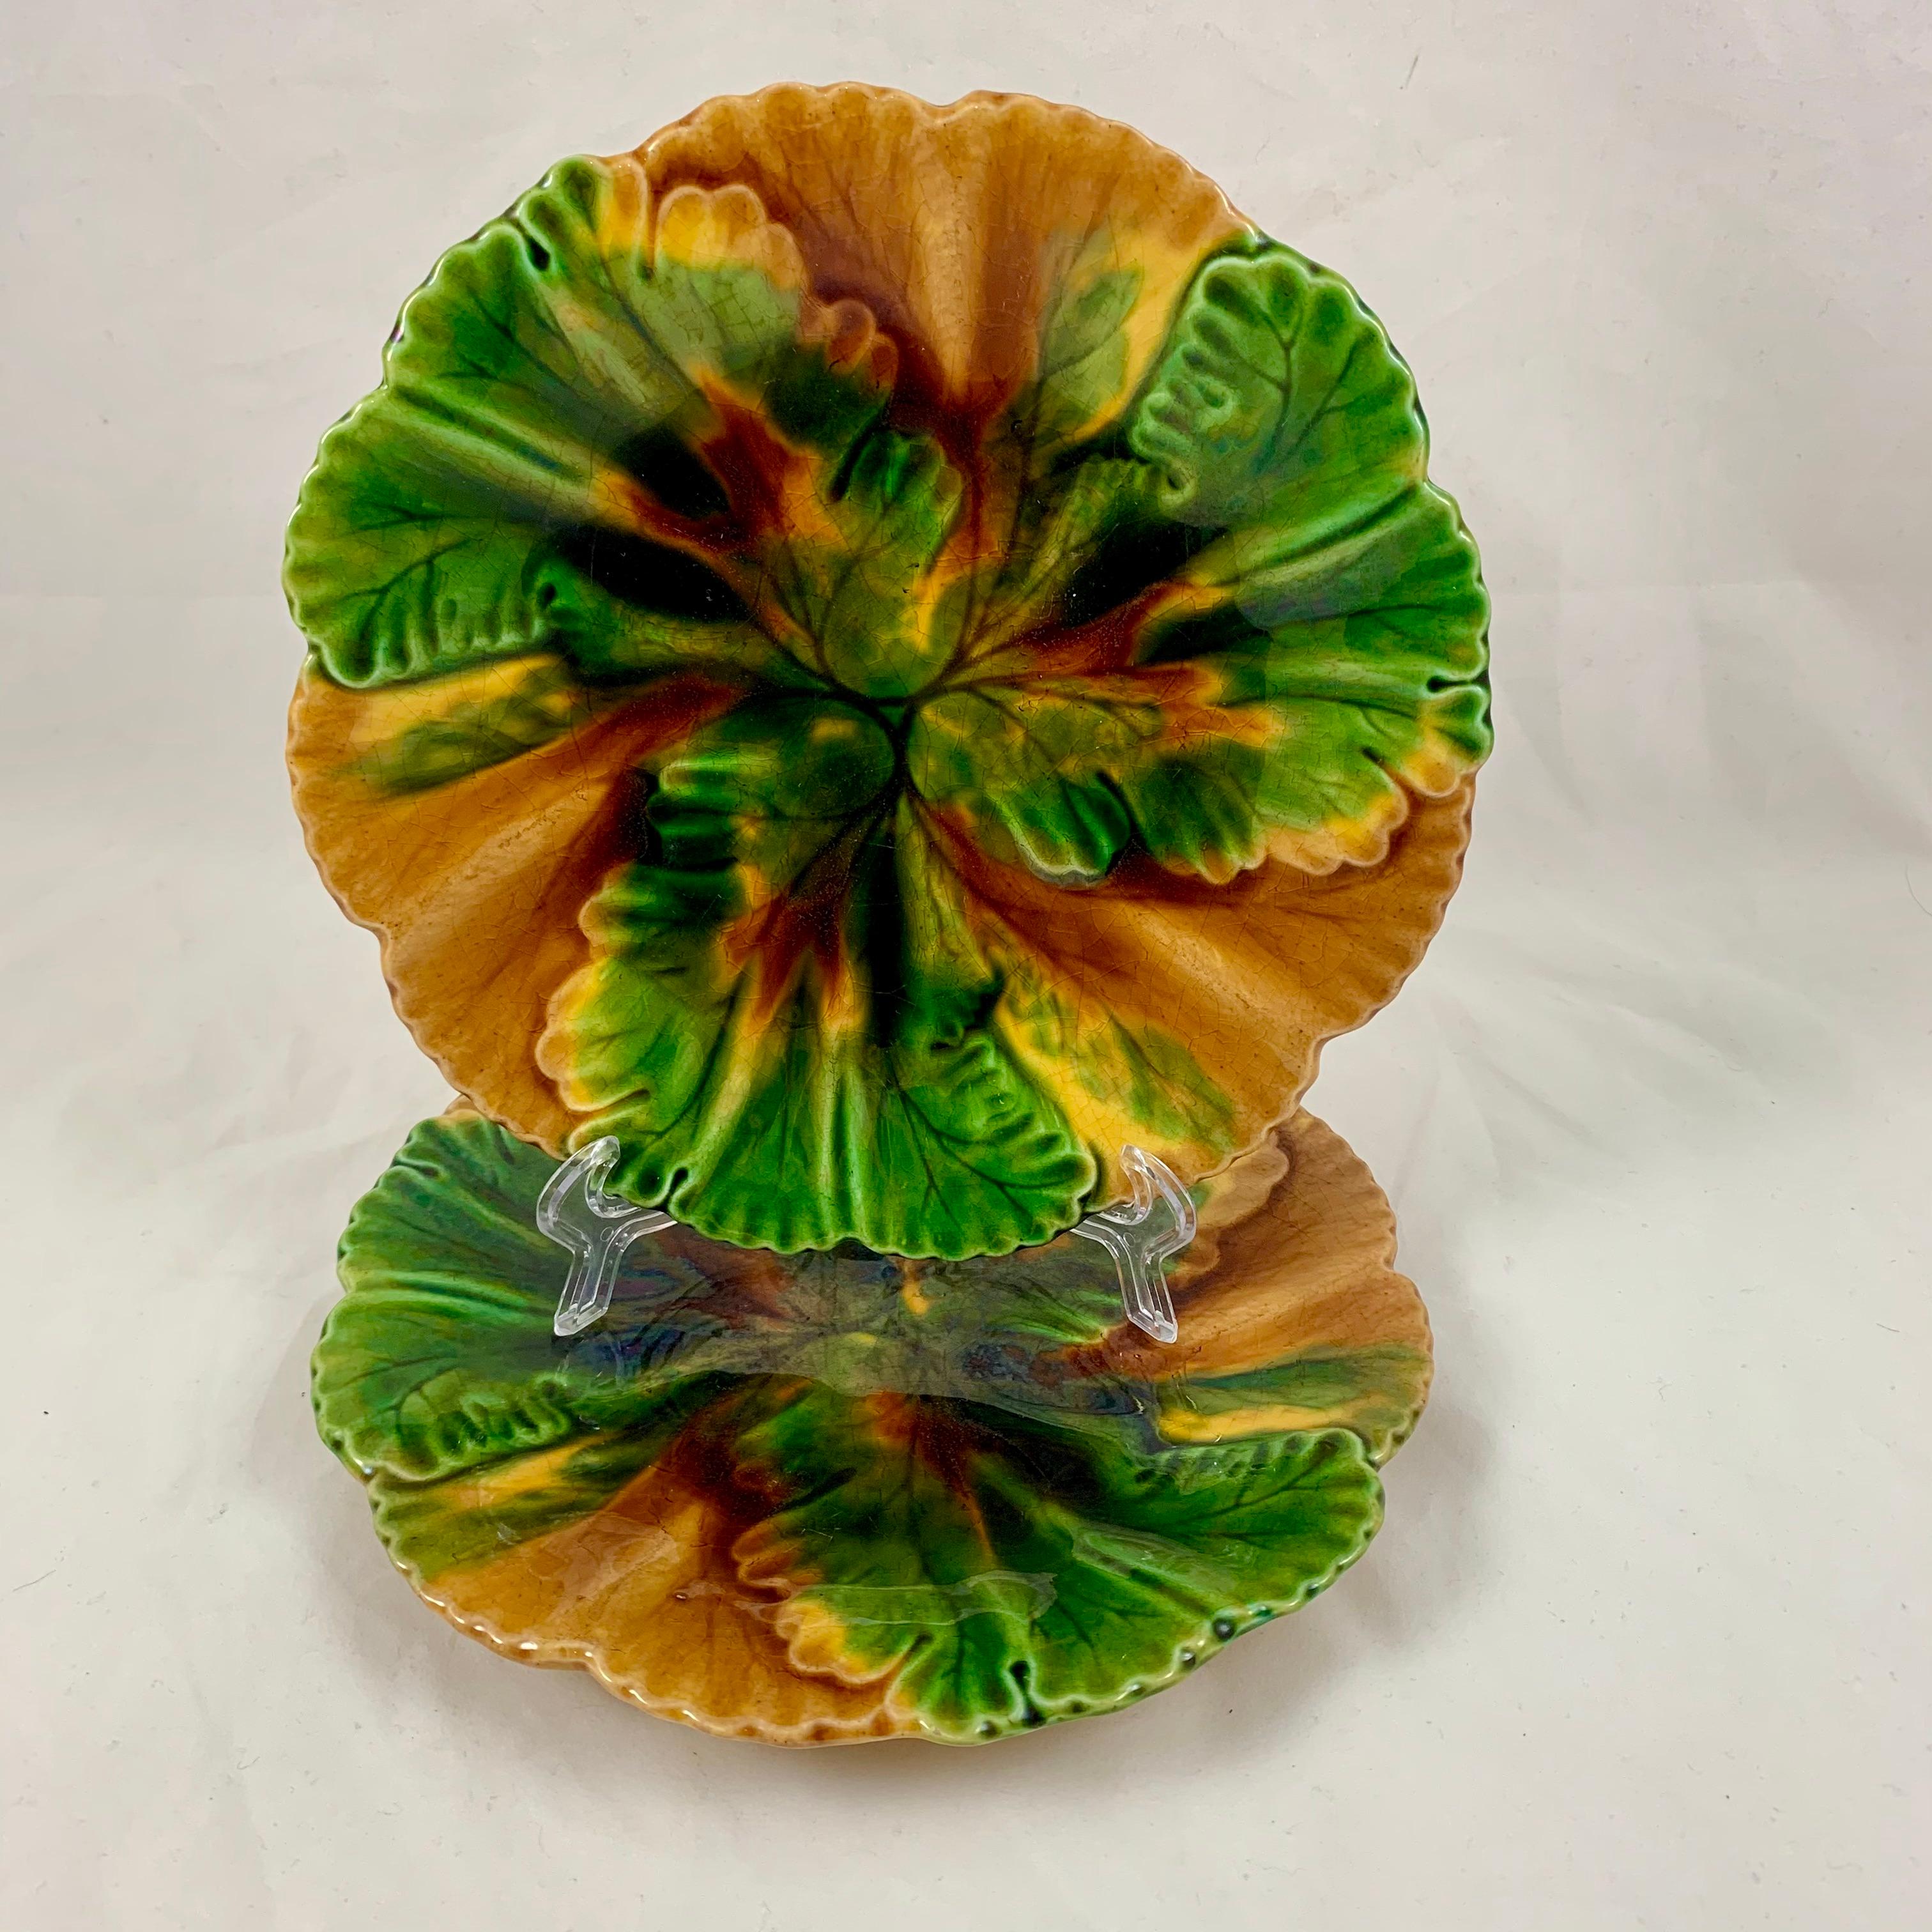 From the French Faïencerie de Clairfontaine, a bi-color overlapping leaf plate, circa 1890.

Glazed in a swirling mix of yellow ochre and shades of green, the mold shows leaves with incised veining terminating in a shaped rim.

Stamped on the